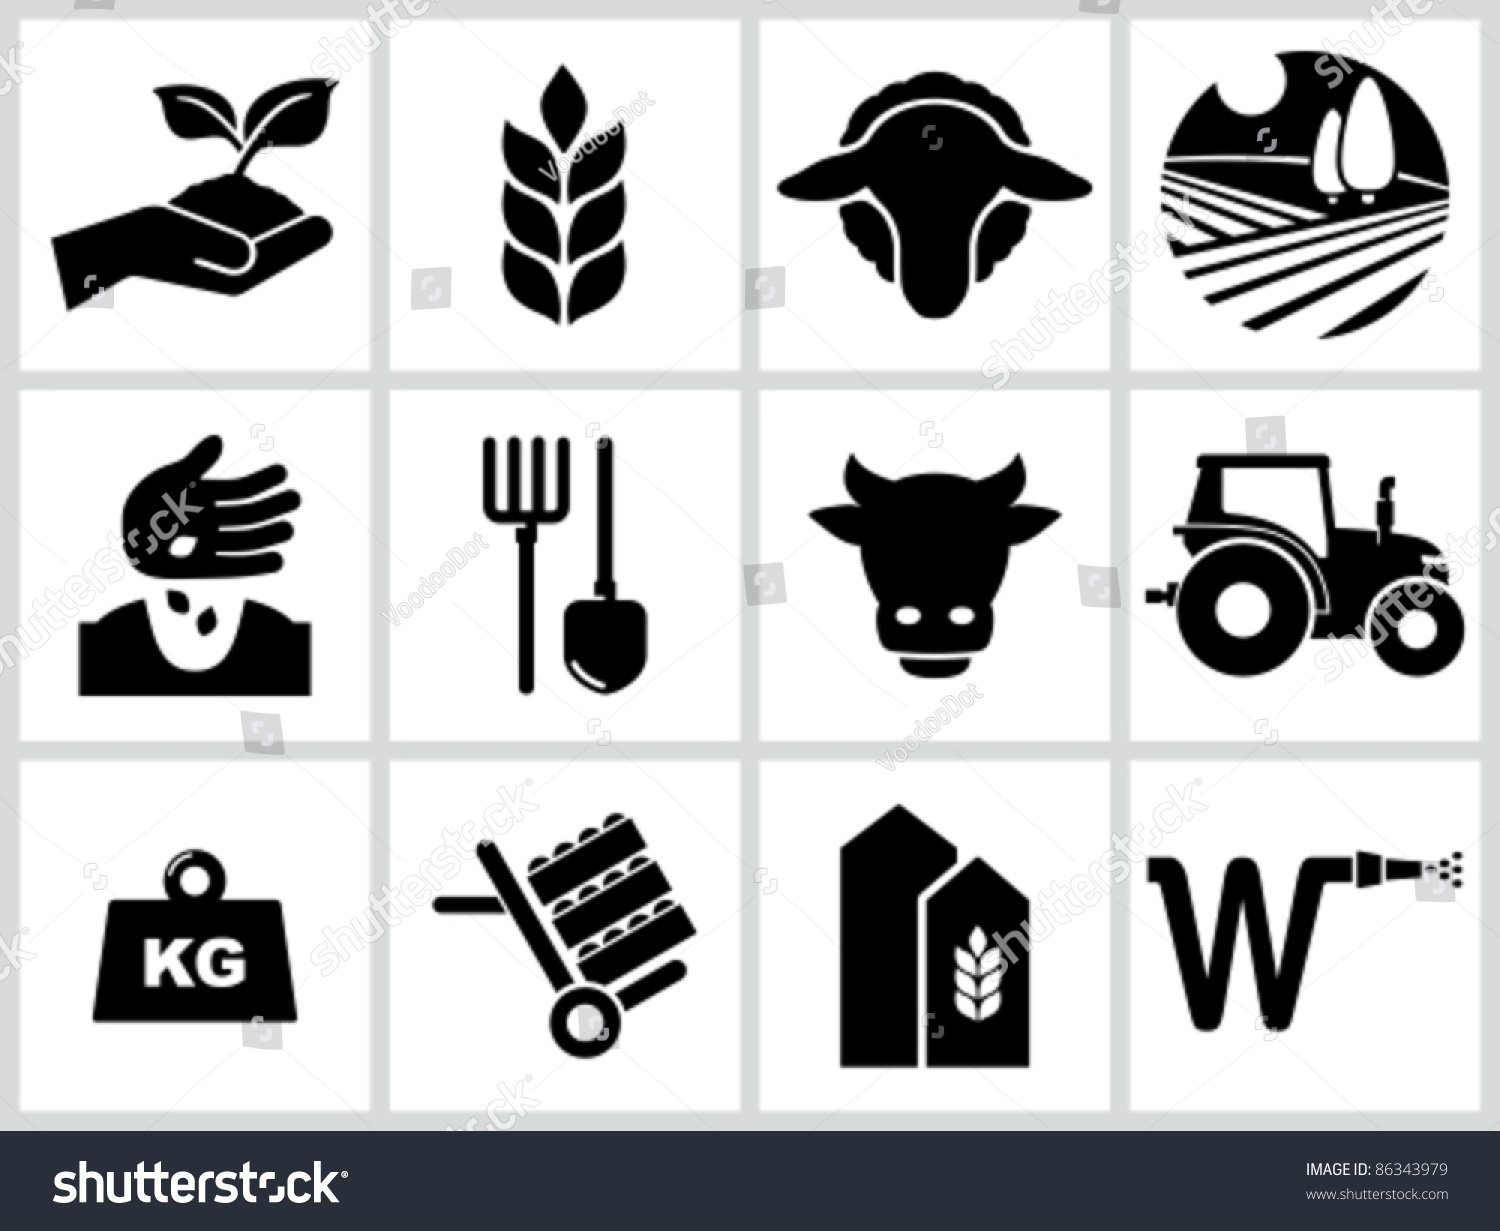 Agriculture and farming icons. All white areas are cut away from icons and black areas merged. #86343979